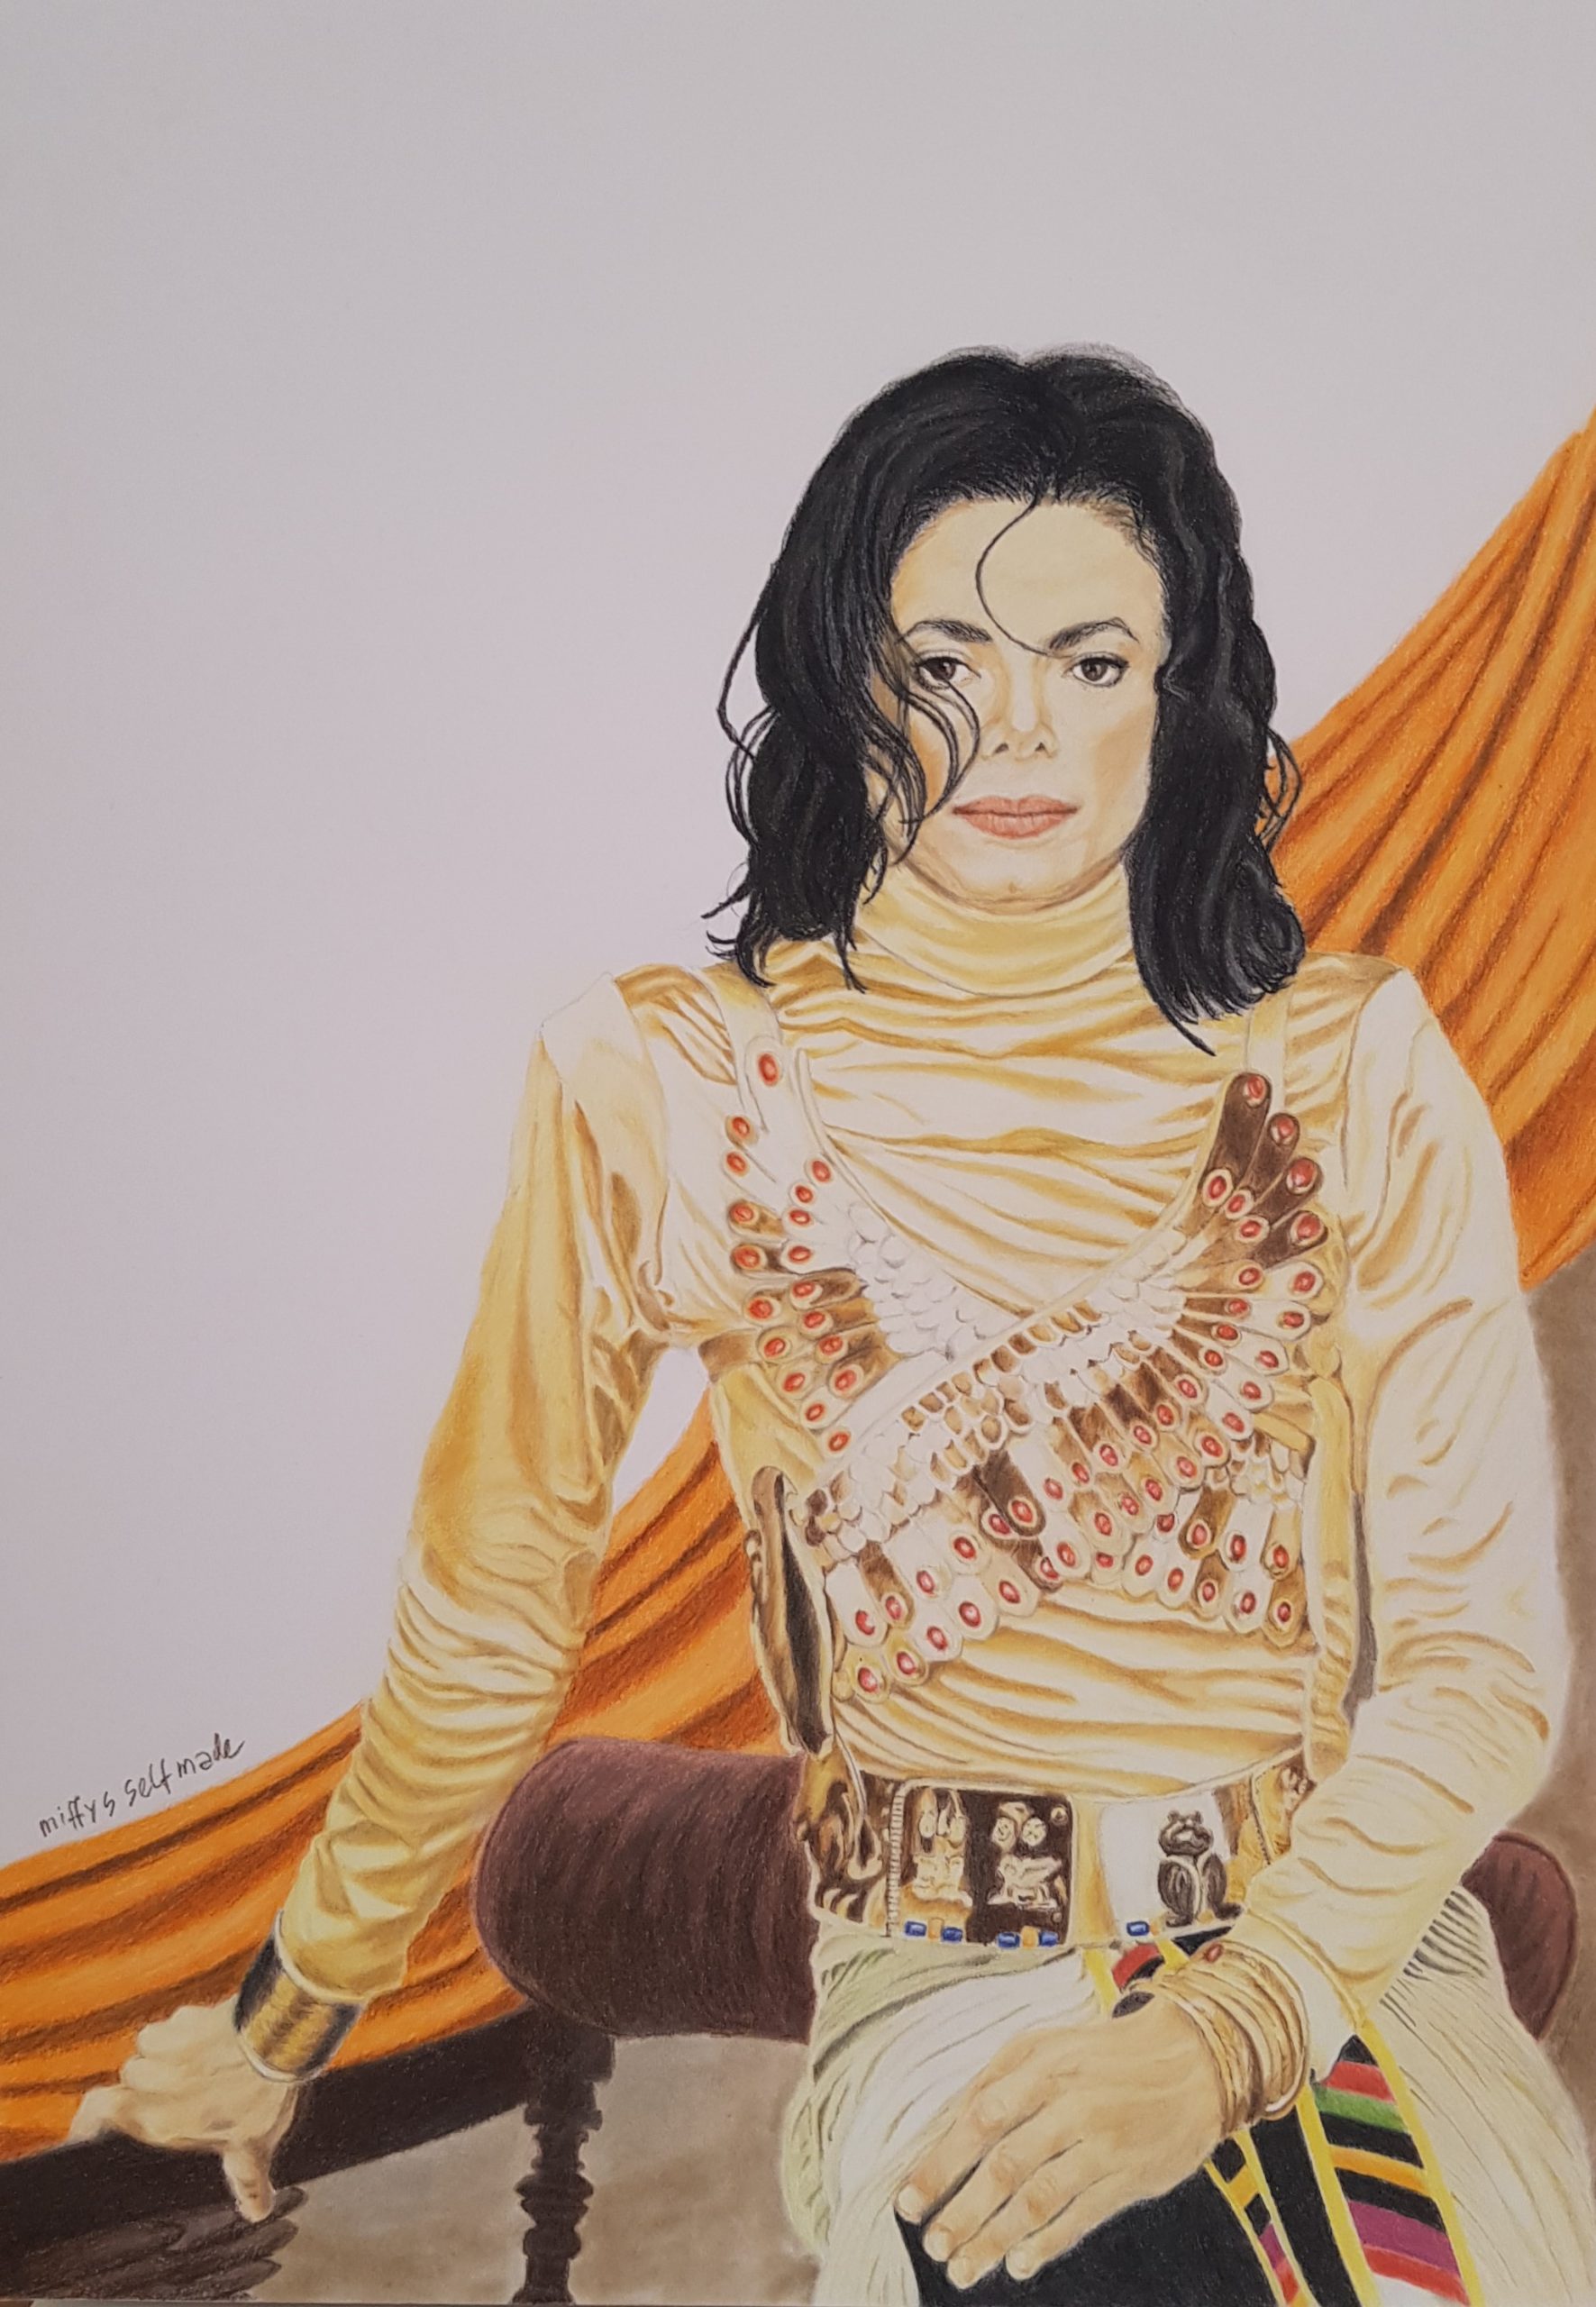 MICHAEL JACKSON: REMEMBER THE TIME COSTUMES